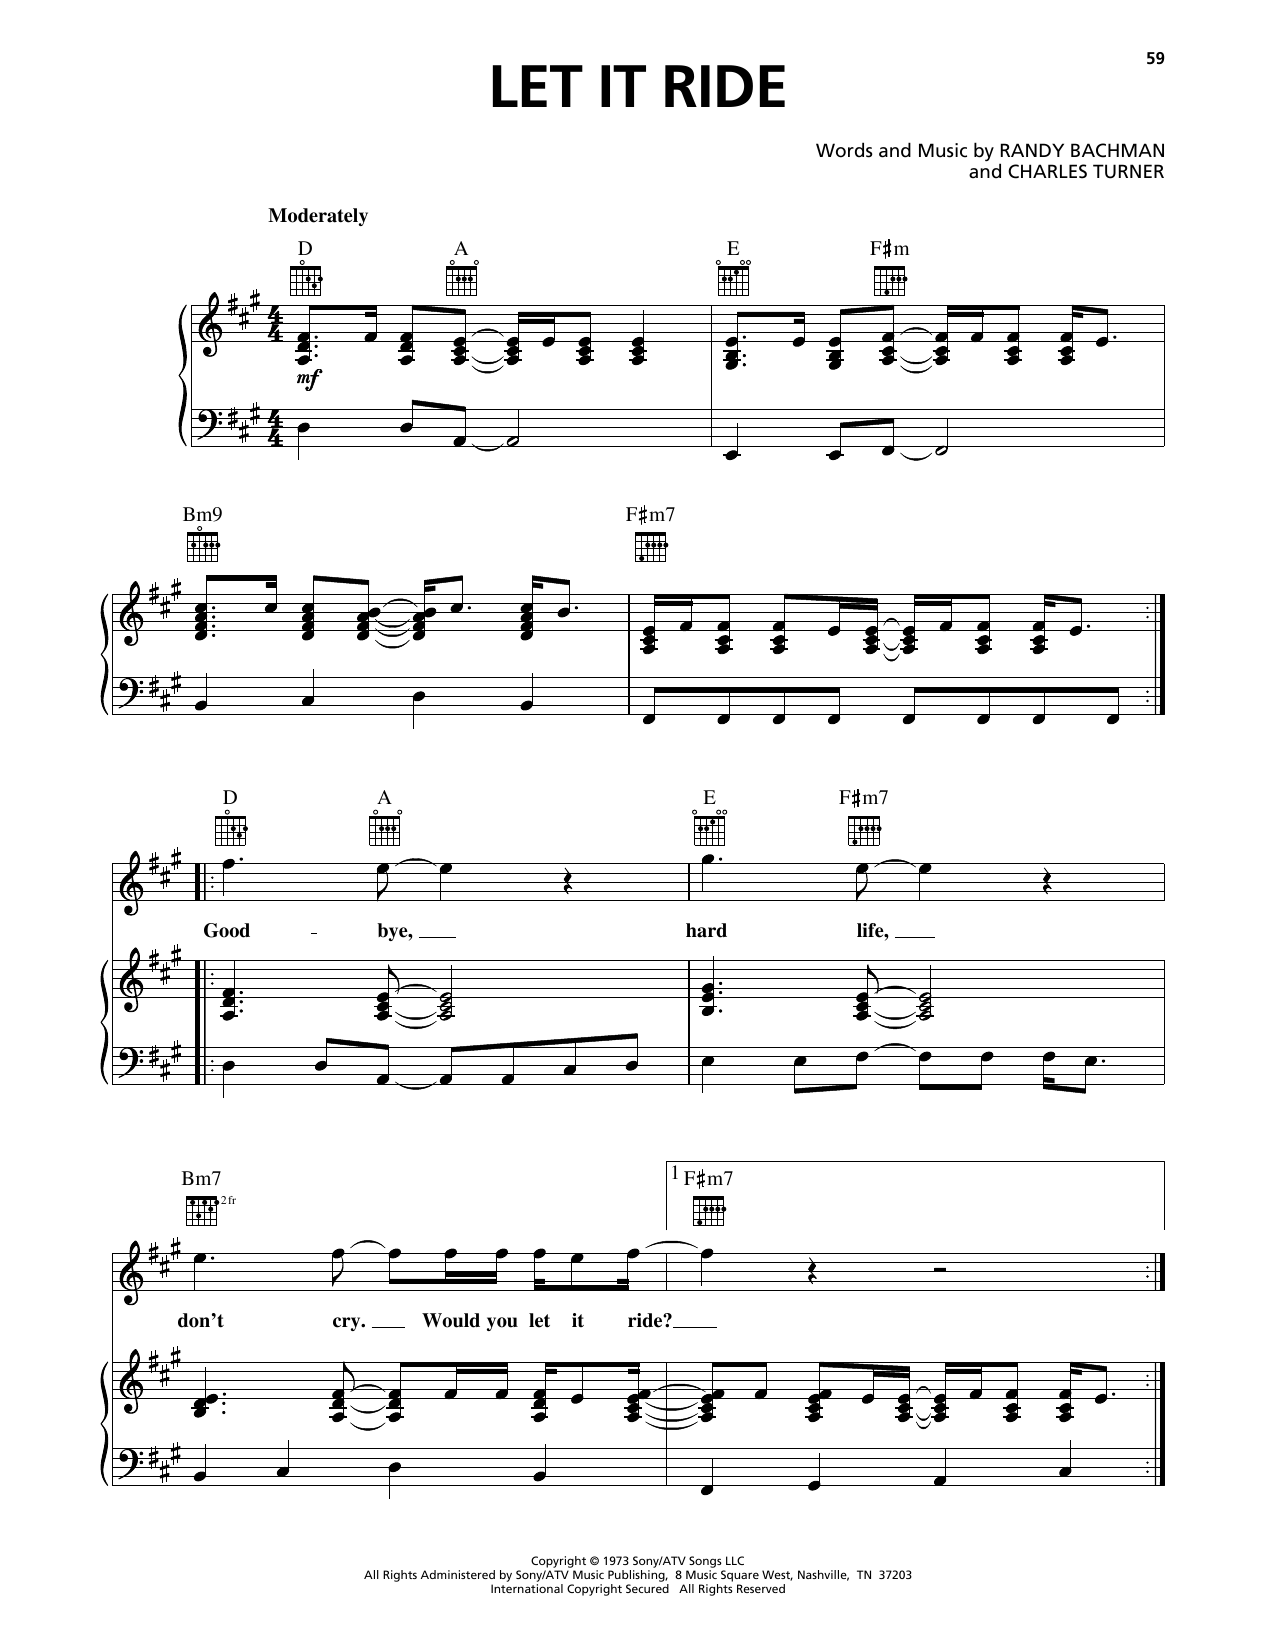 Download Bachman-Turner Overdrive Let It Ride Sheet Music